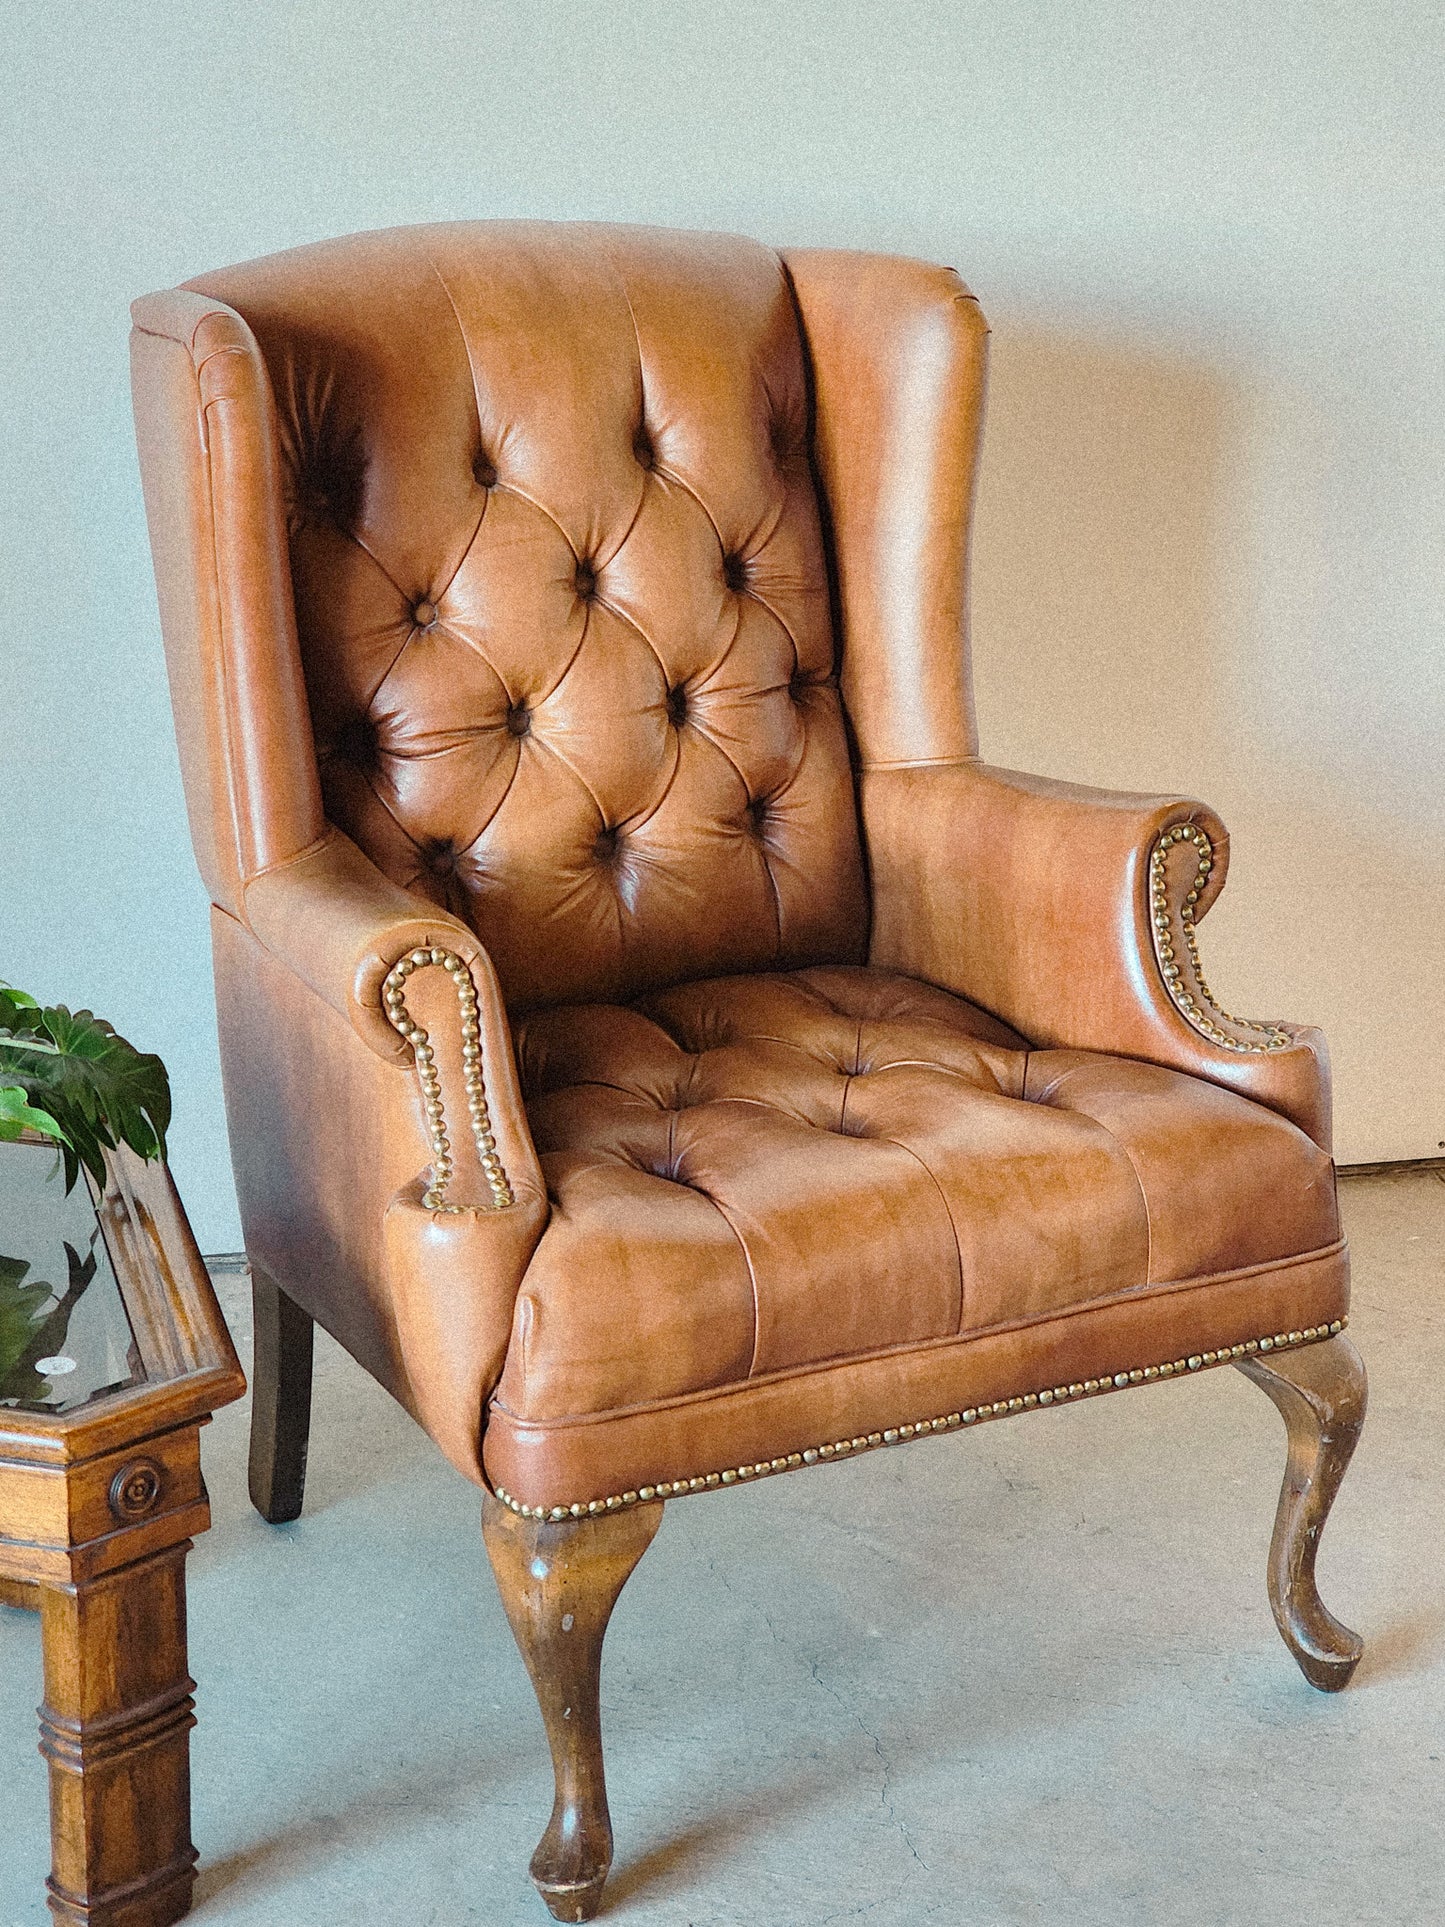 Tufted Leather Armchair - Reclaimed Mt. Goods